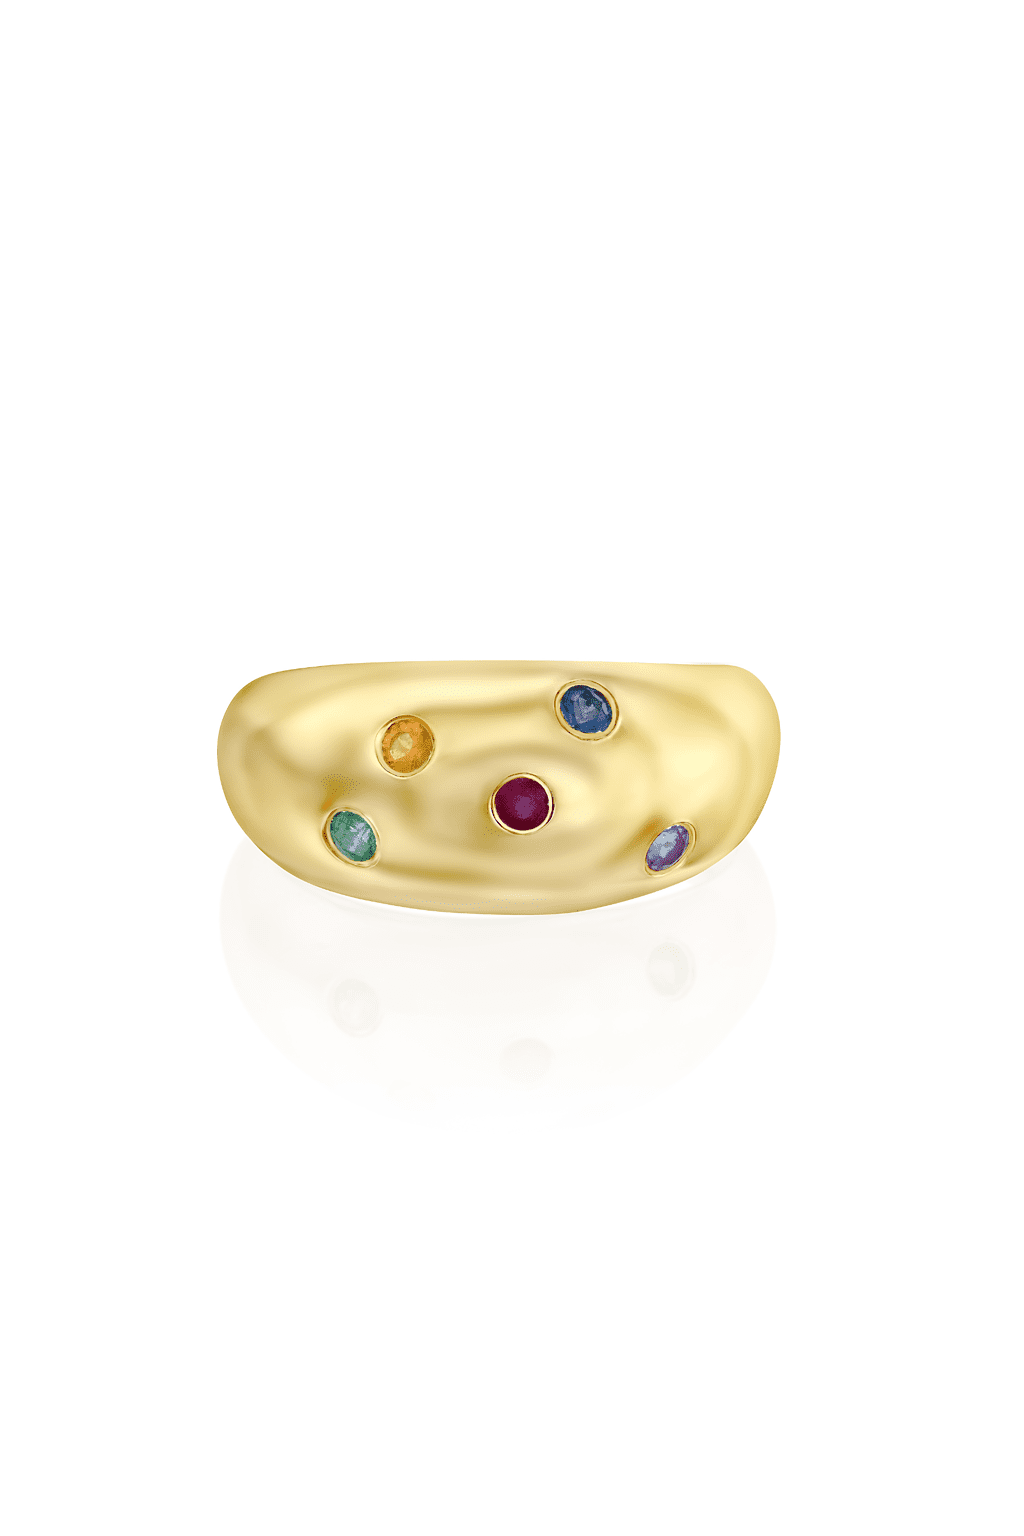 AFTER PARTY RING - 14K GOLD & GEMS